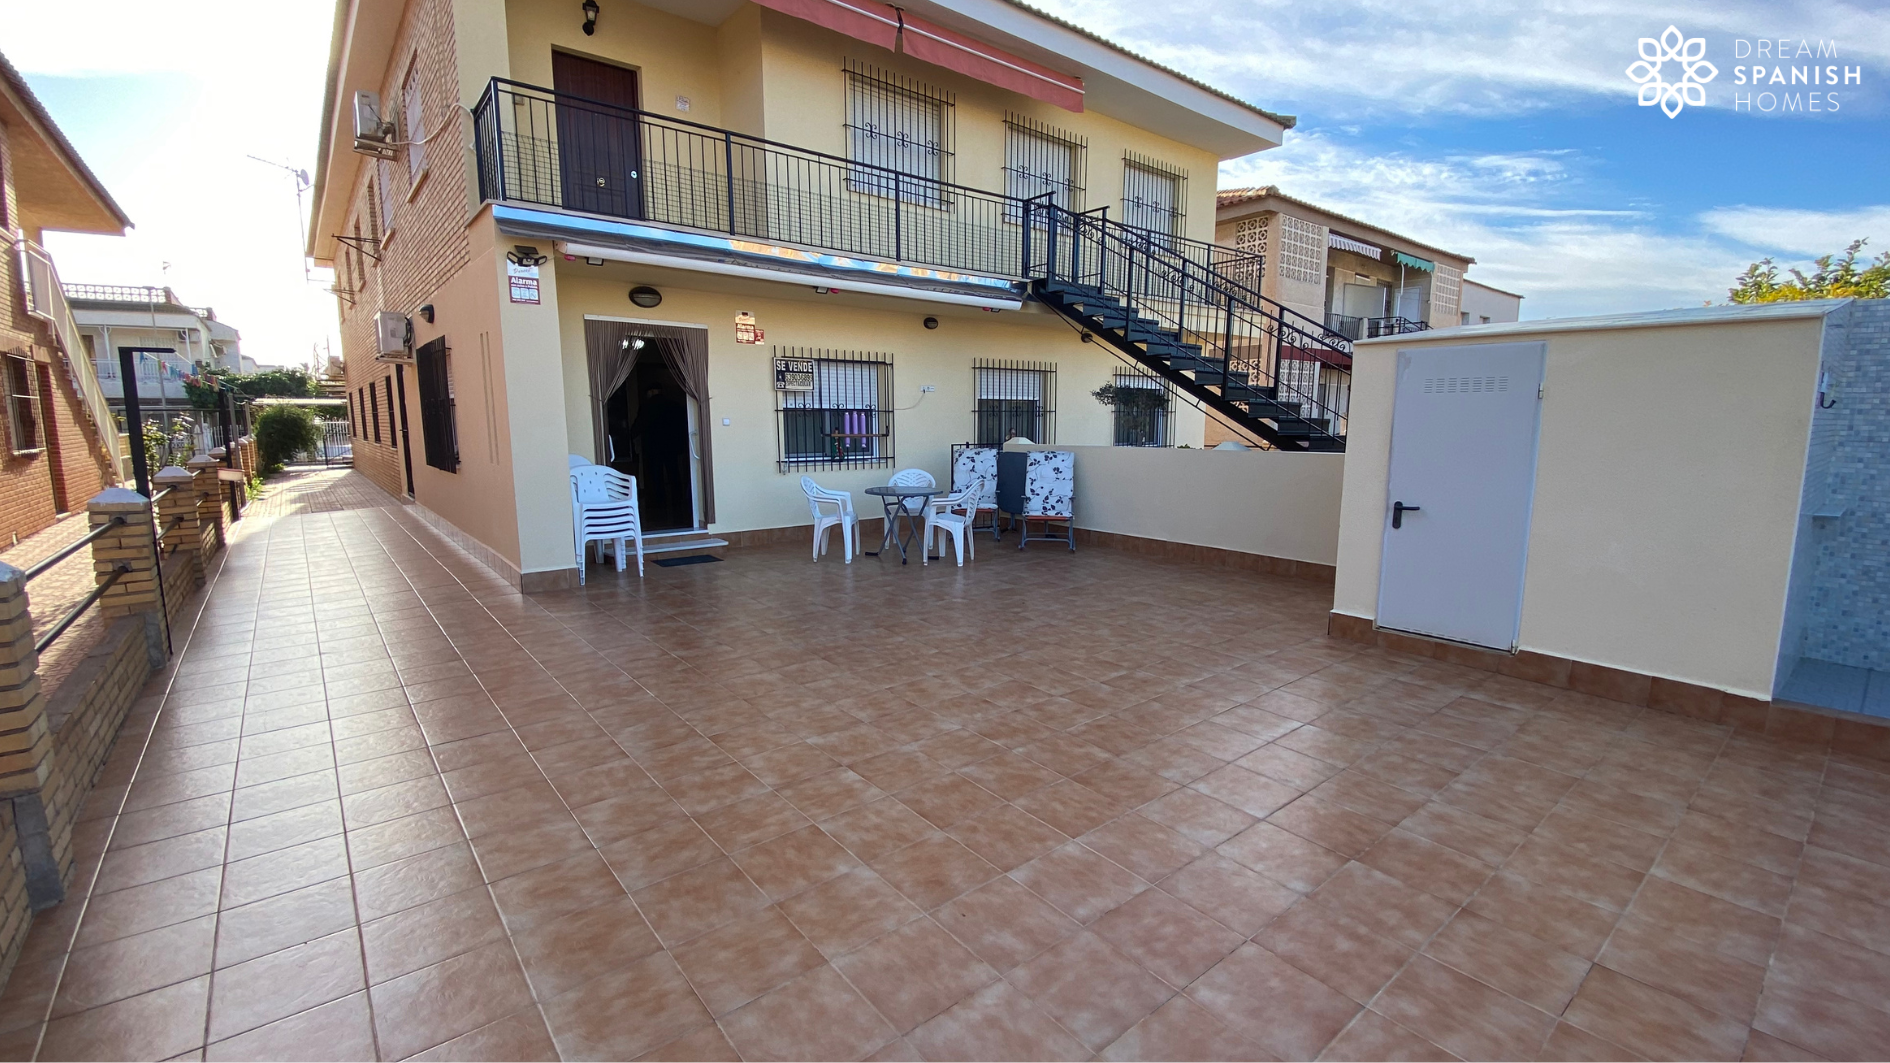 Los Alcazares - 3 Bed Ground Floor Apartment 150mtr from the beach (C) 2